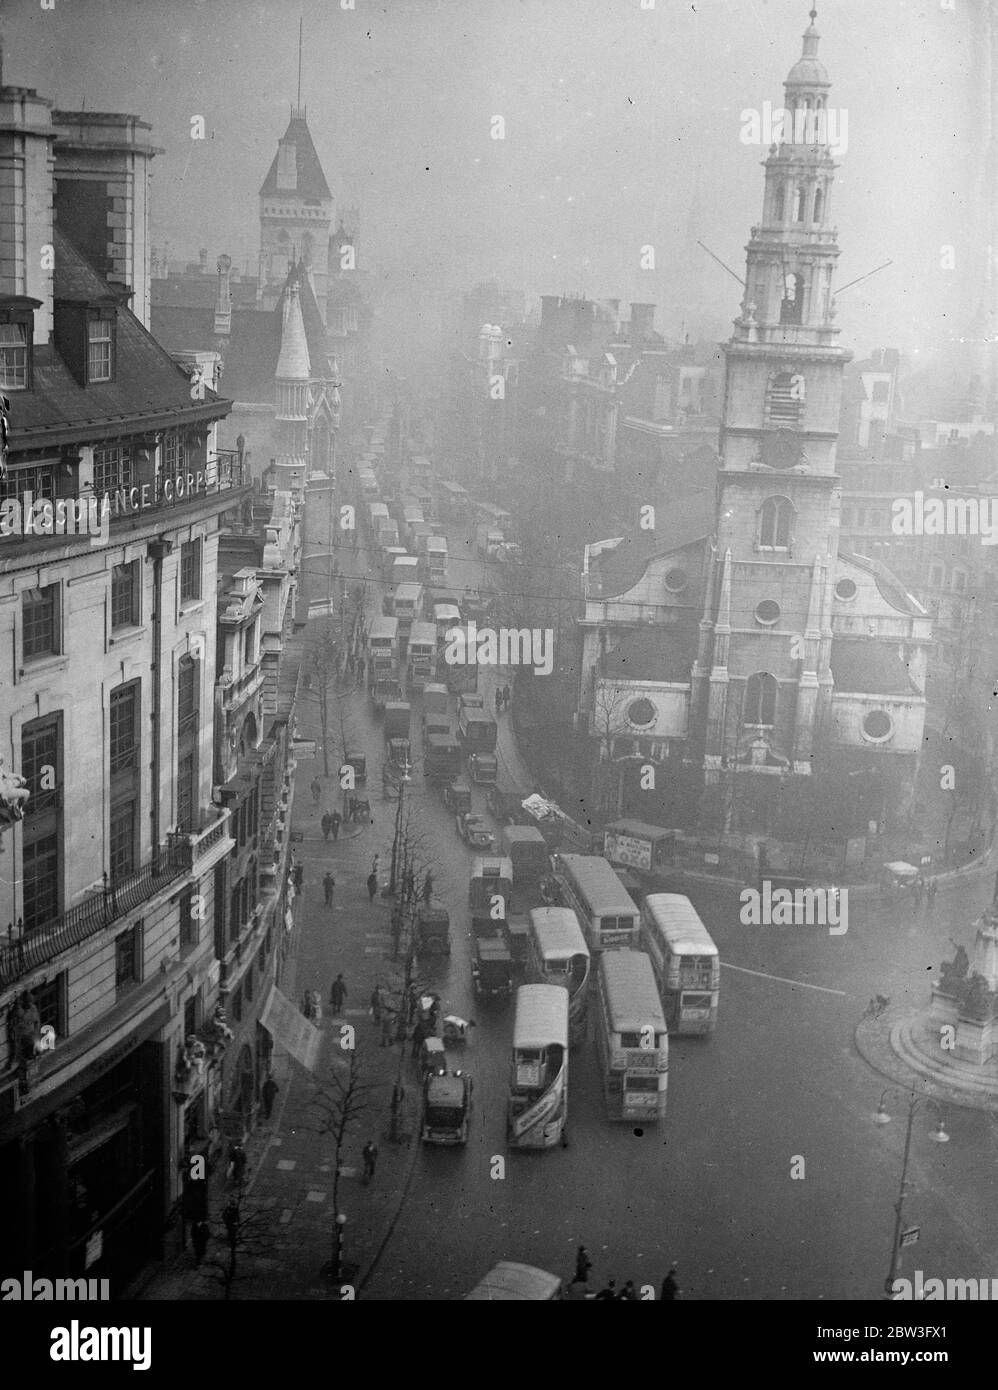 Traffic jam in Strand and Fleet Street . One of the worst jams seen in London for months brought traffic to a virtual standstill all the way from Ludgate Circus to the Strand . Photo shows , a view of Fleet Street from the Strand at the height of the jam . 4 February 1935 Stock Photo